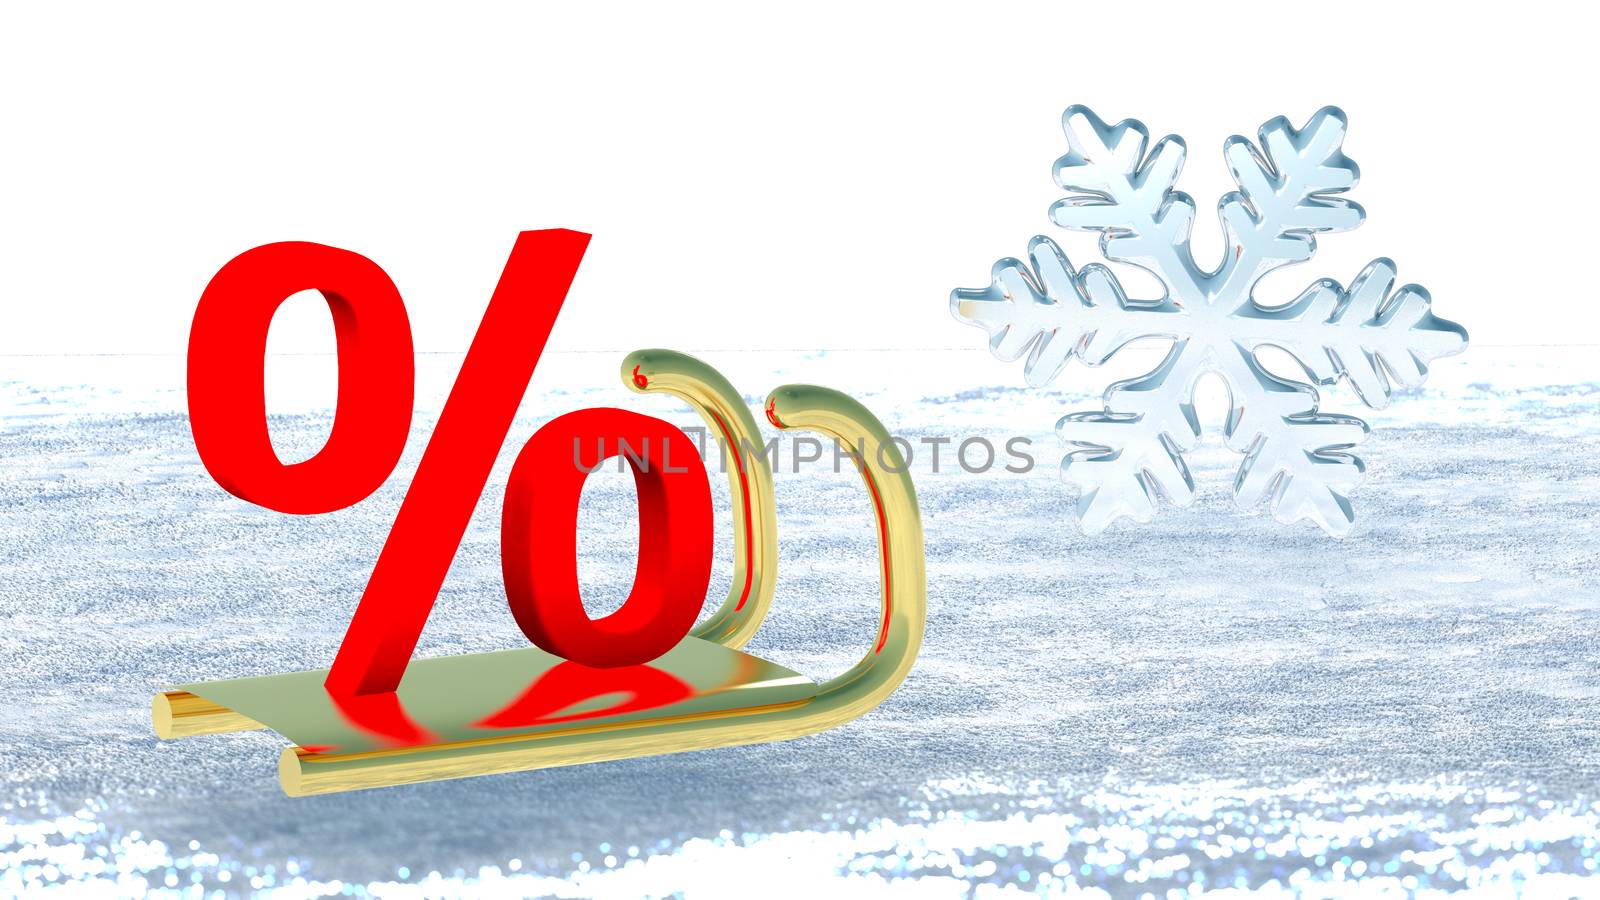 A percent symbol on Santa Claus sleigh that symbolizes winter promotions by ytjo